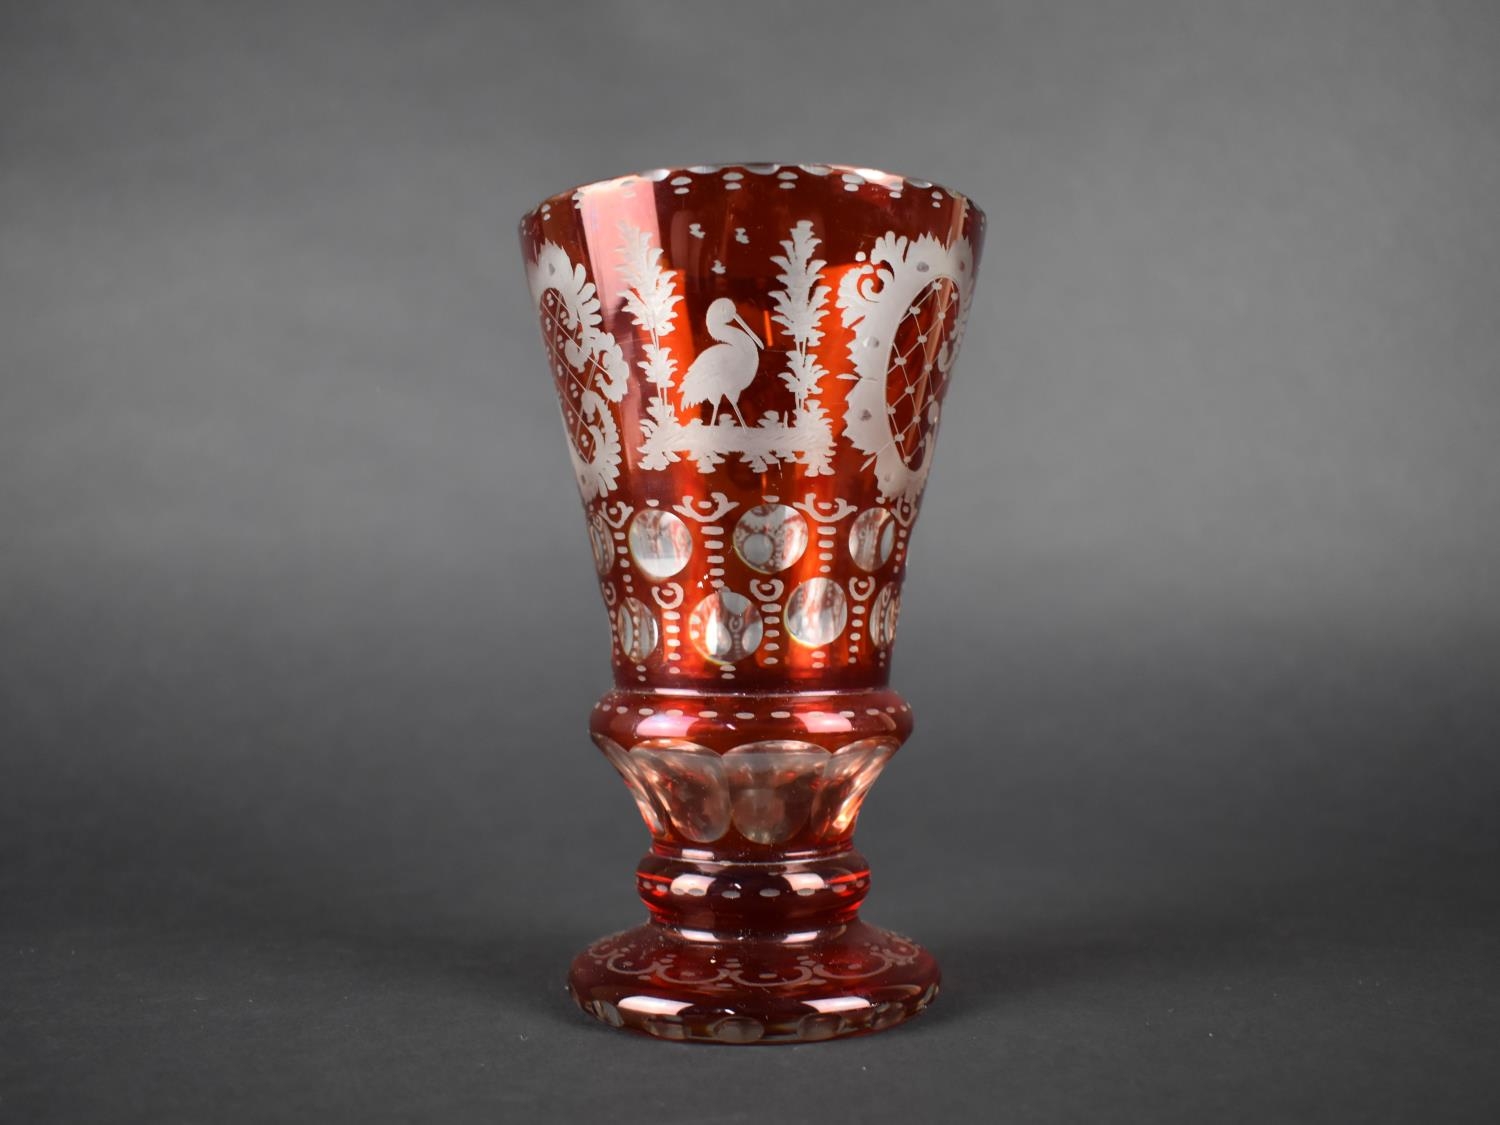 A Bohemian Etched Ruby Glass Vase Decorated with Foliage, Scrolls, Deer, Stalk, Castle, 16cm high - Image 2 of 5